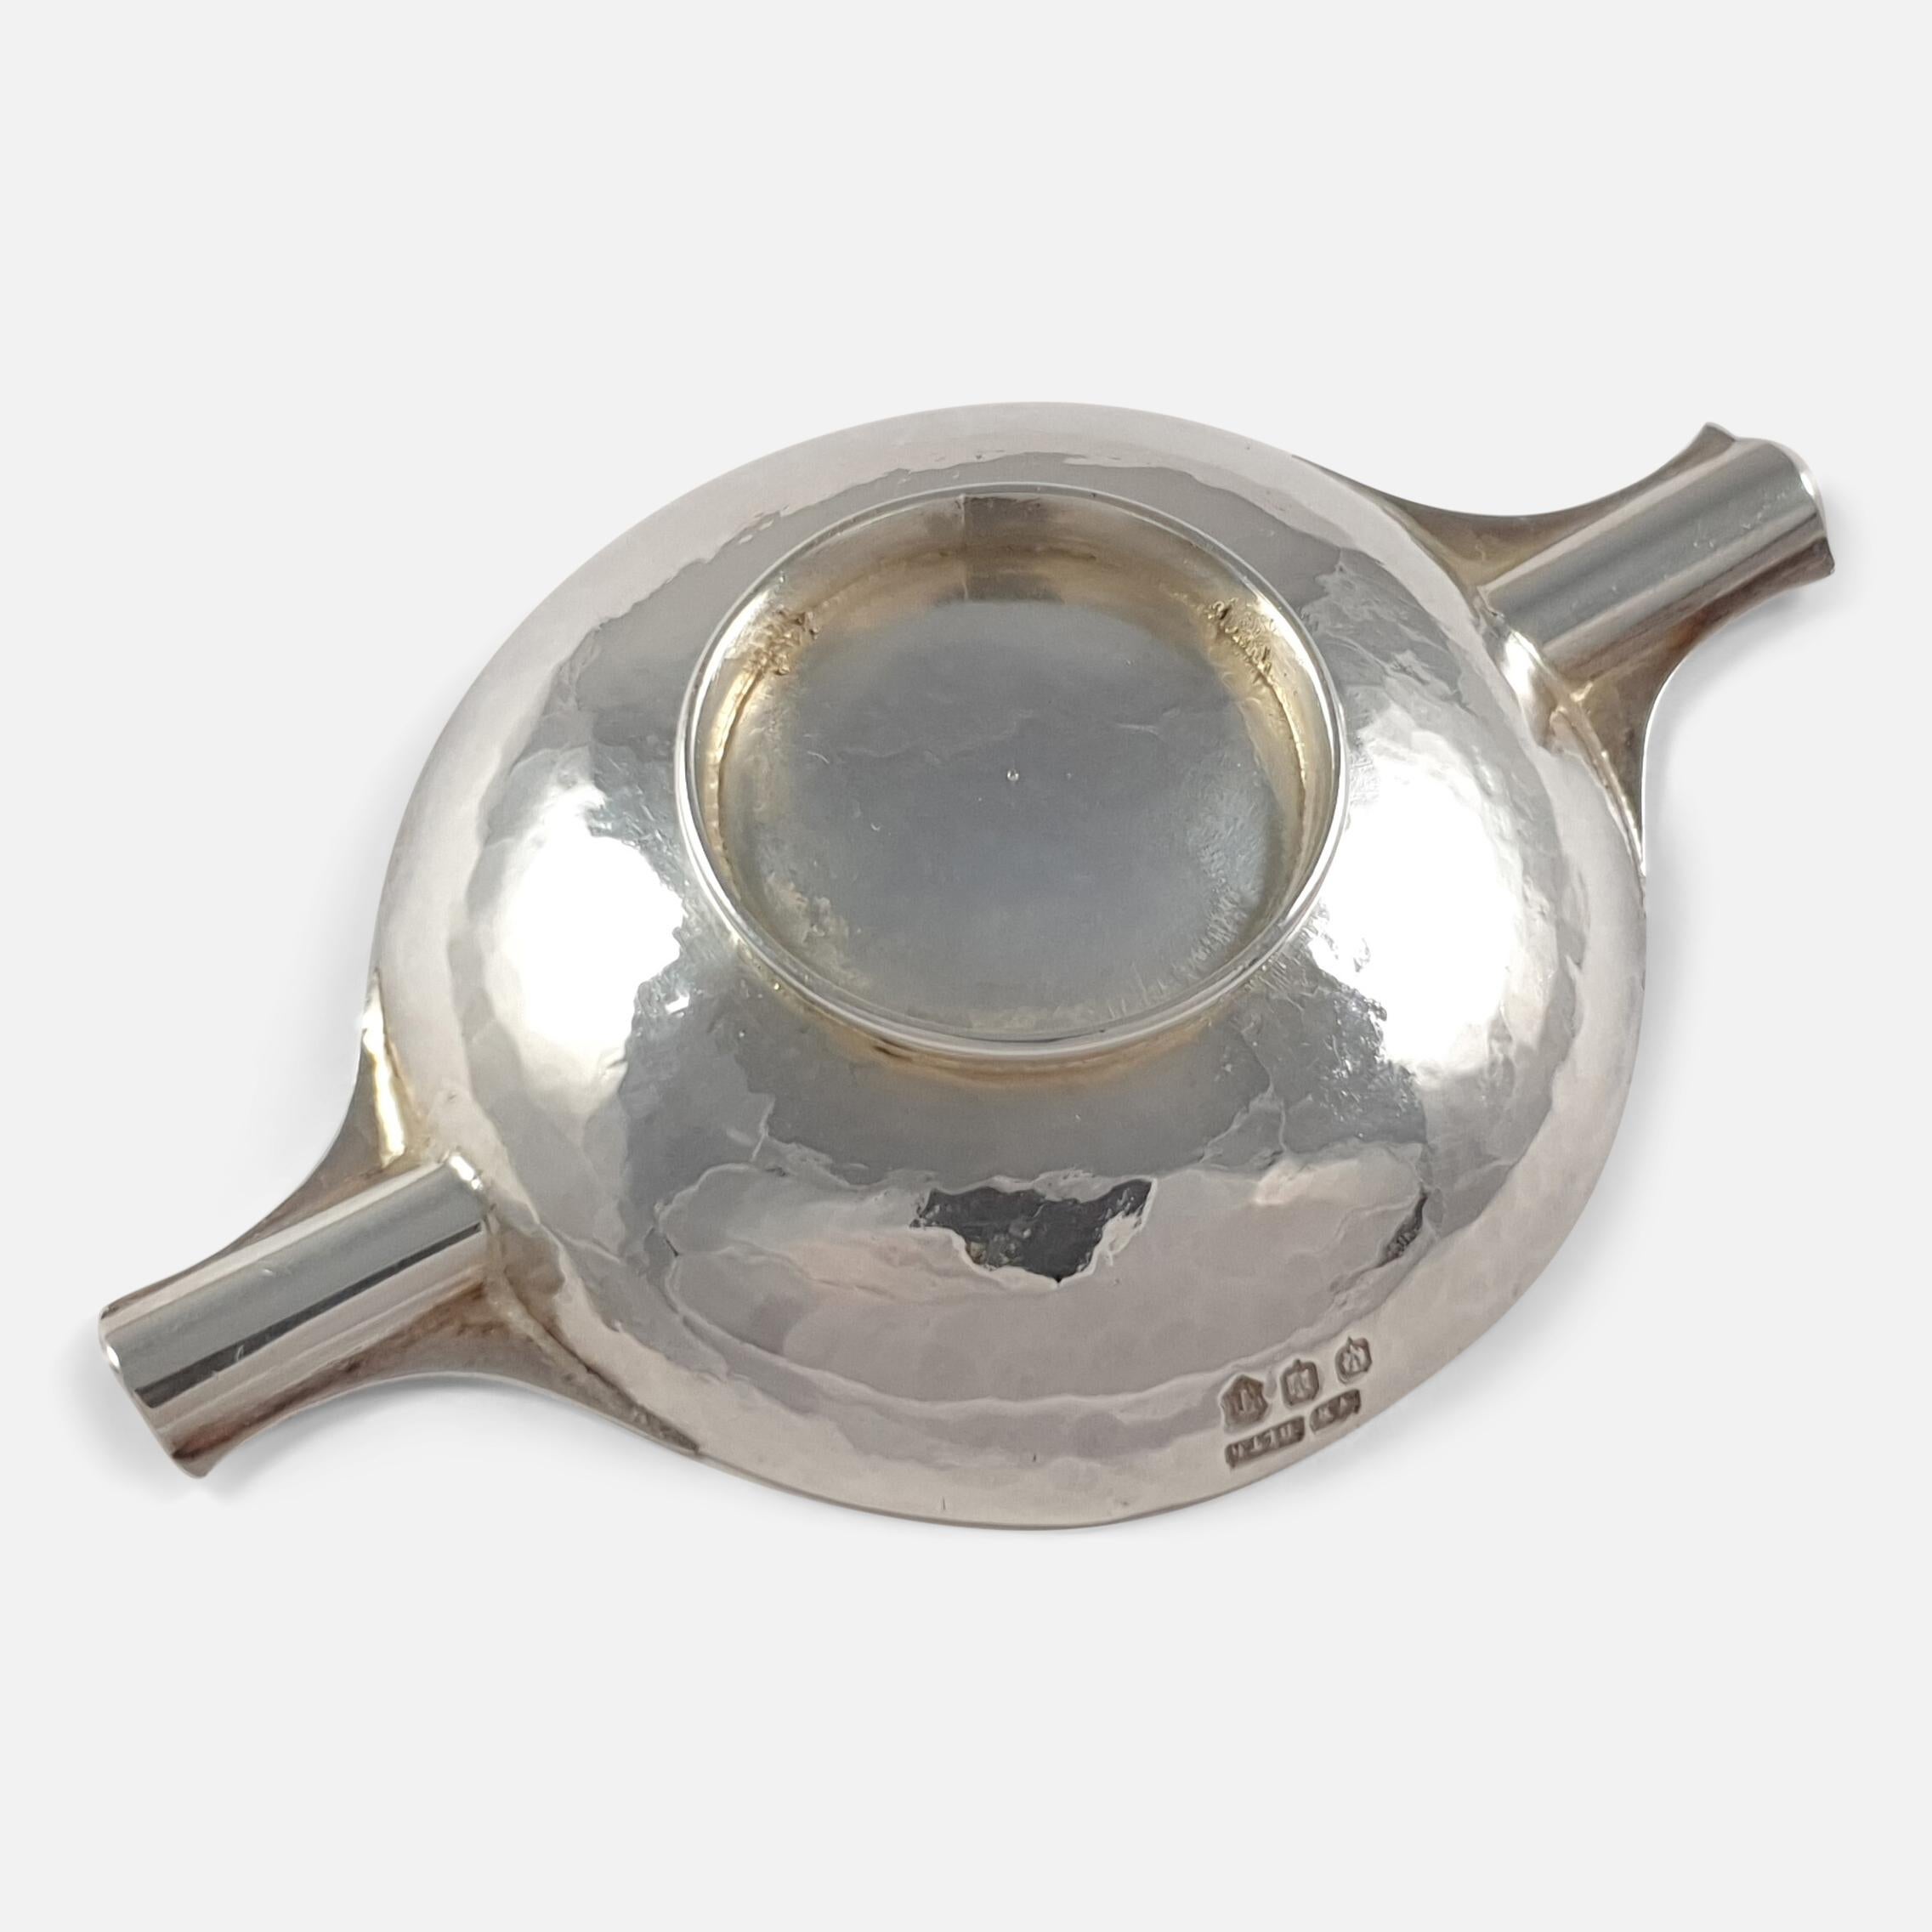 Early 20th Century Scottish Sterling Silver Hammered Ashtray, William Robb, Edinburgh, 1924 For Sale